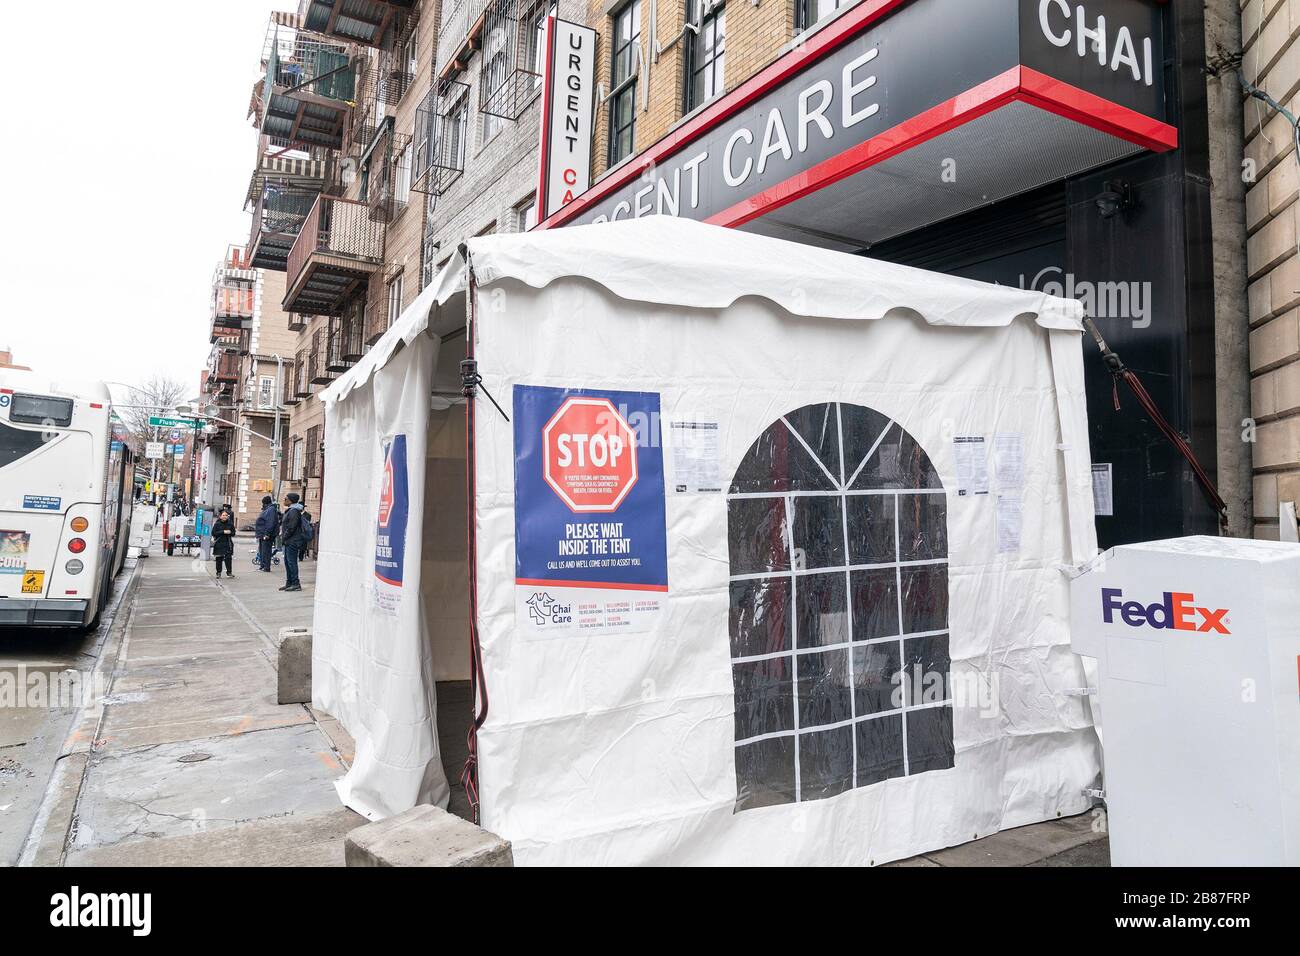 new york united states 19th mar 2020 view of testing site for coronavirus at chai urgent care facility in williamsburg area of brooklyn photo by lev radinpacific presssipa usa credit sipa usaalamy live news 2B87FRP